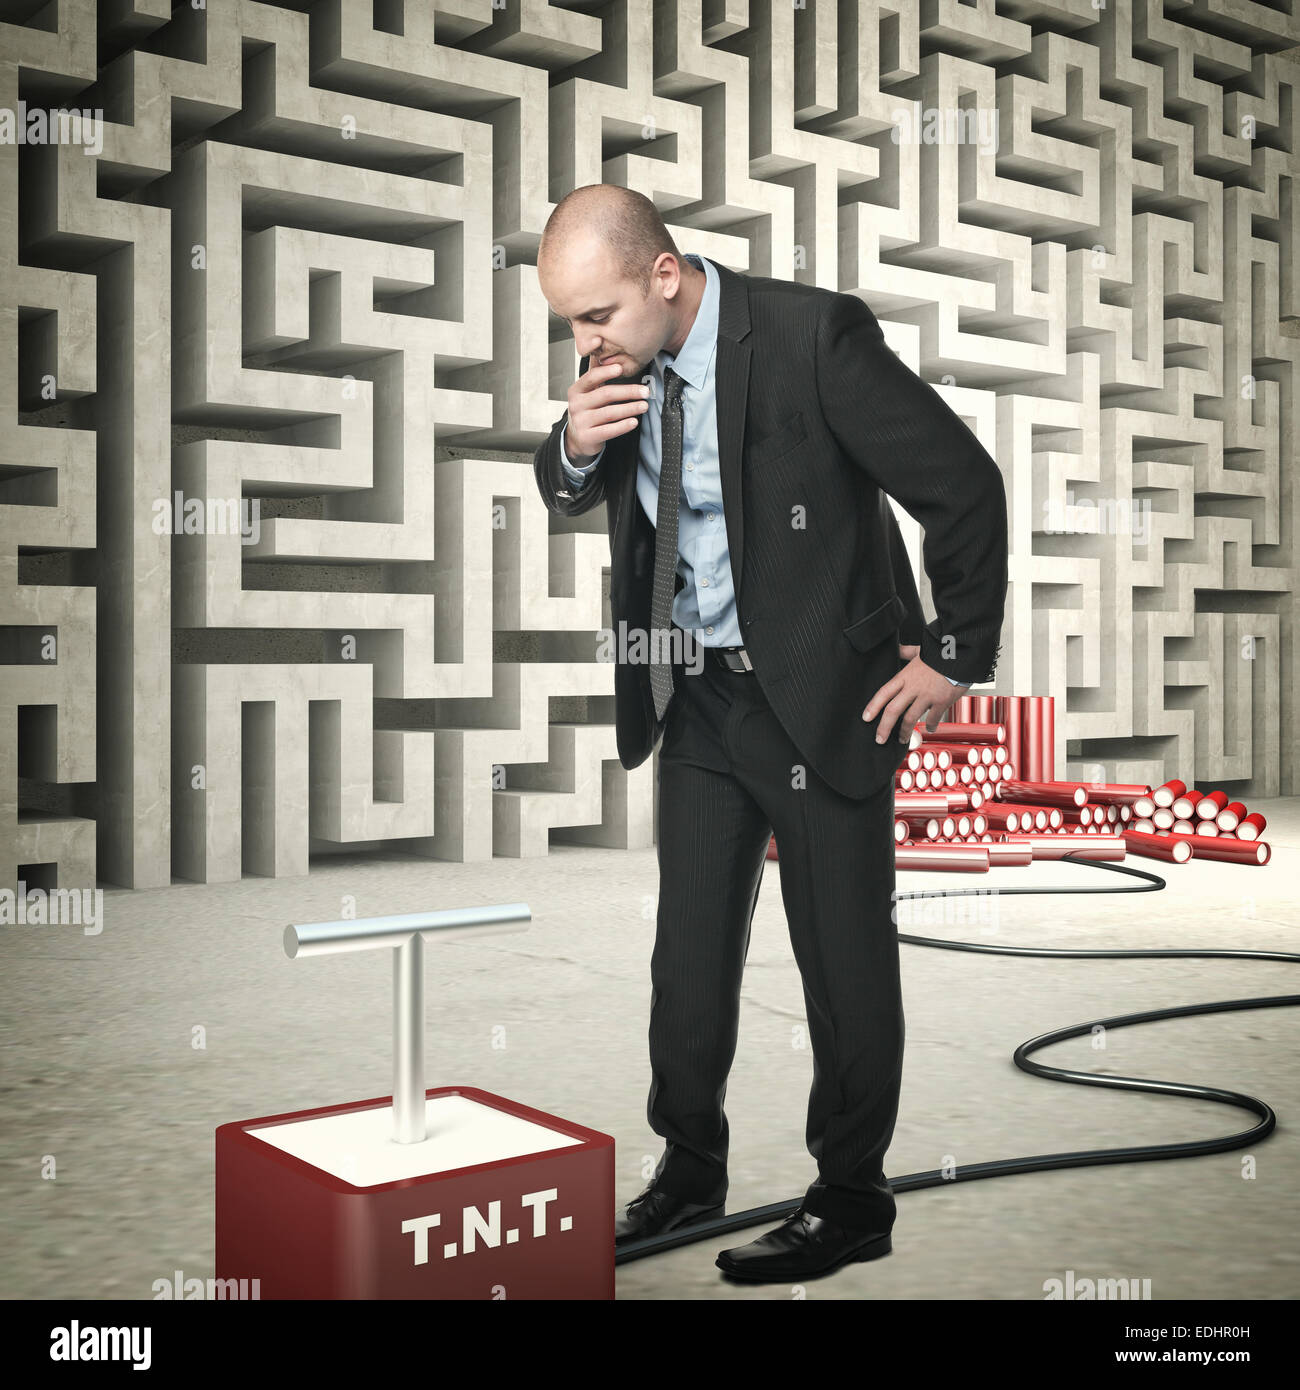 businessman tnt and abstract wall maze Stock Photo